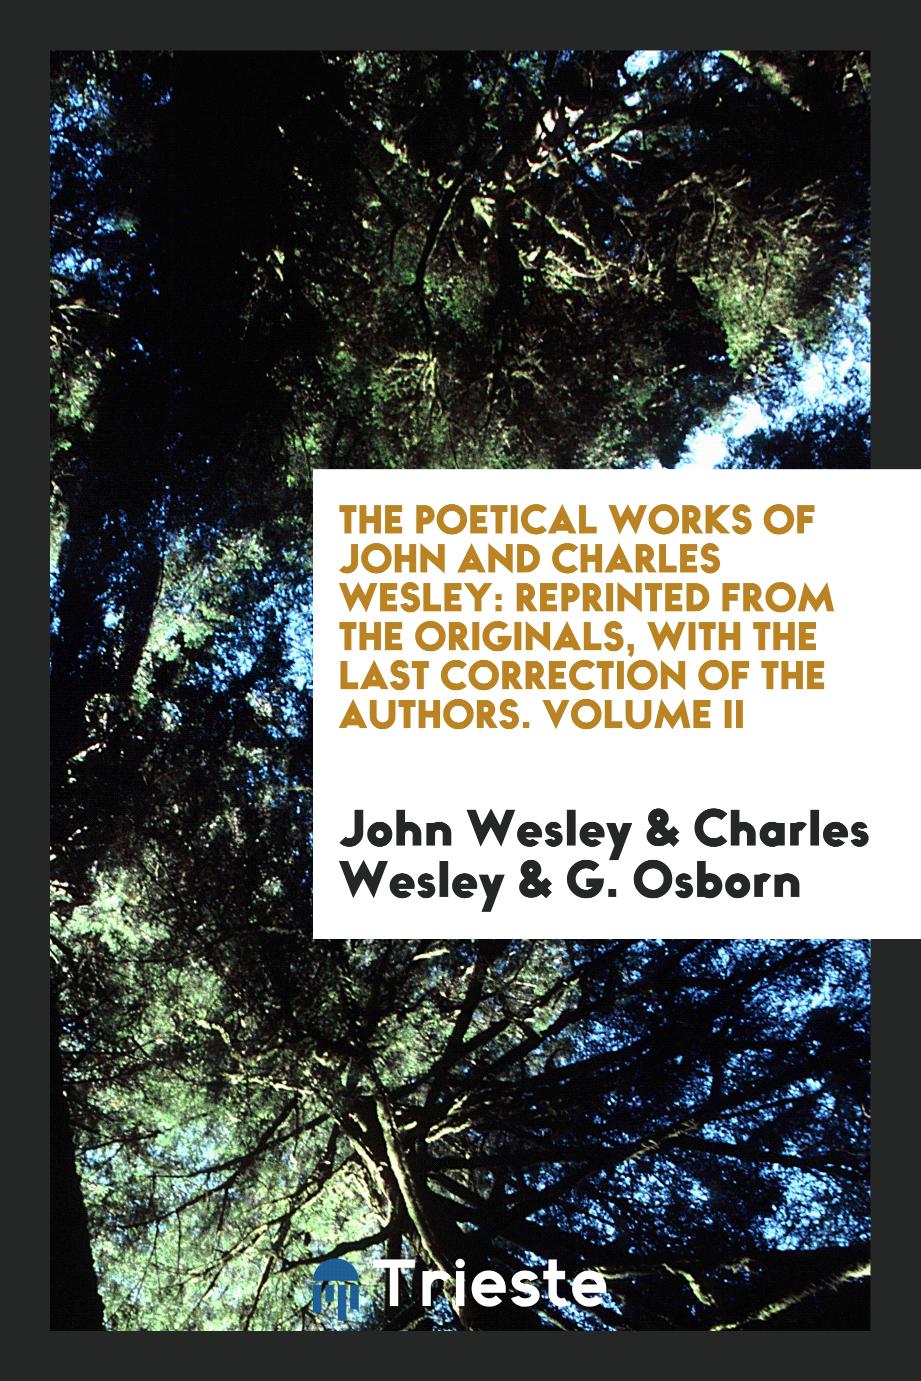 The Poetical Works of John and Charles Wesley: Reprinted from the Originals, with the Last Correction of the Authors. Volume II